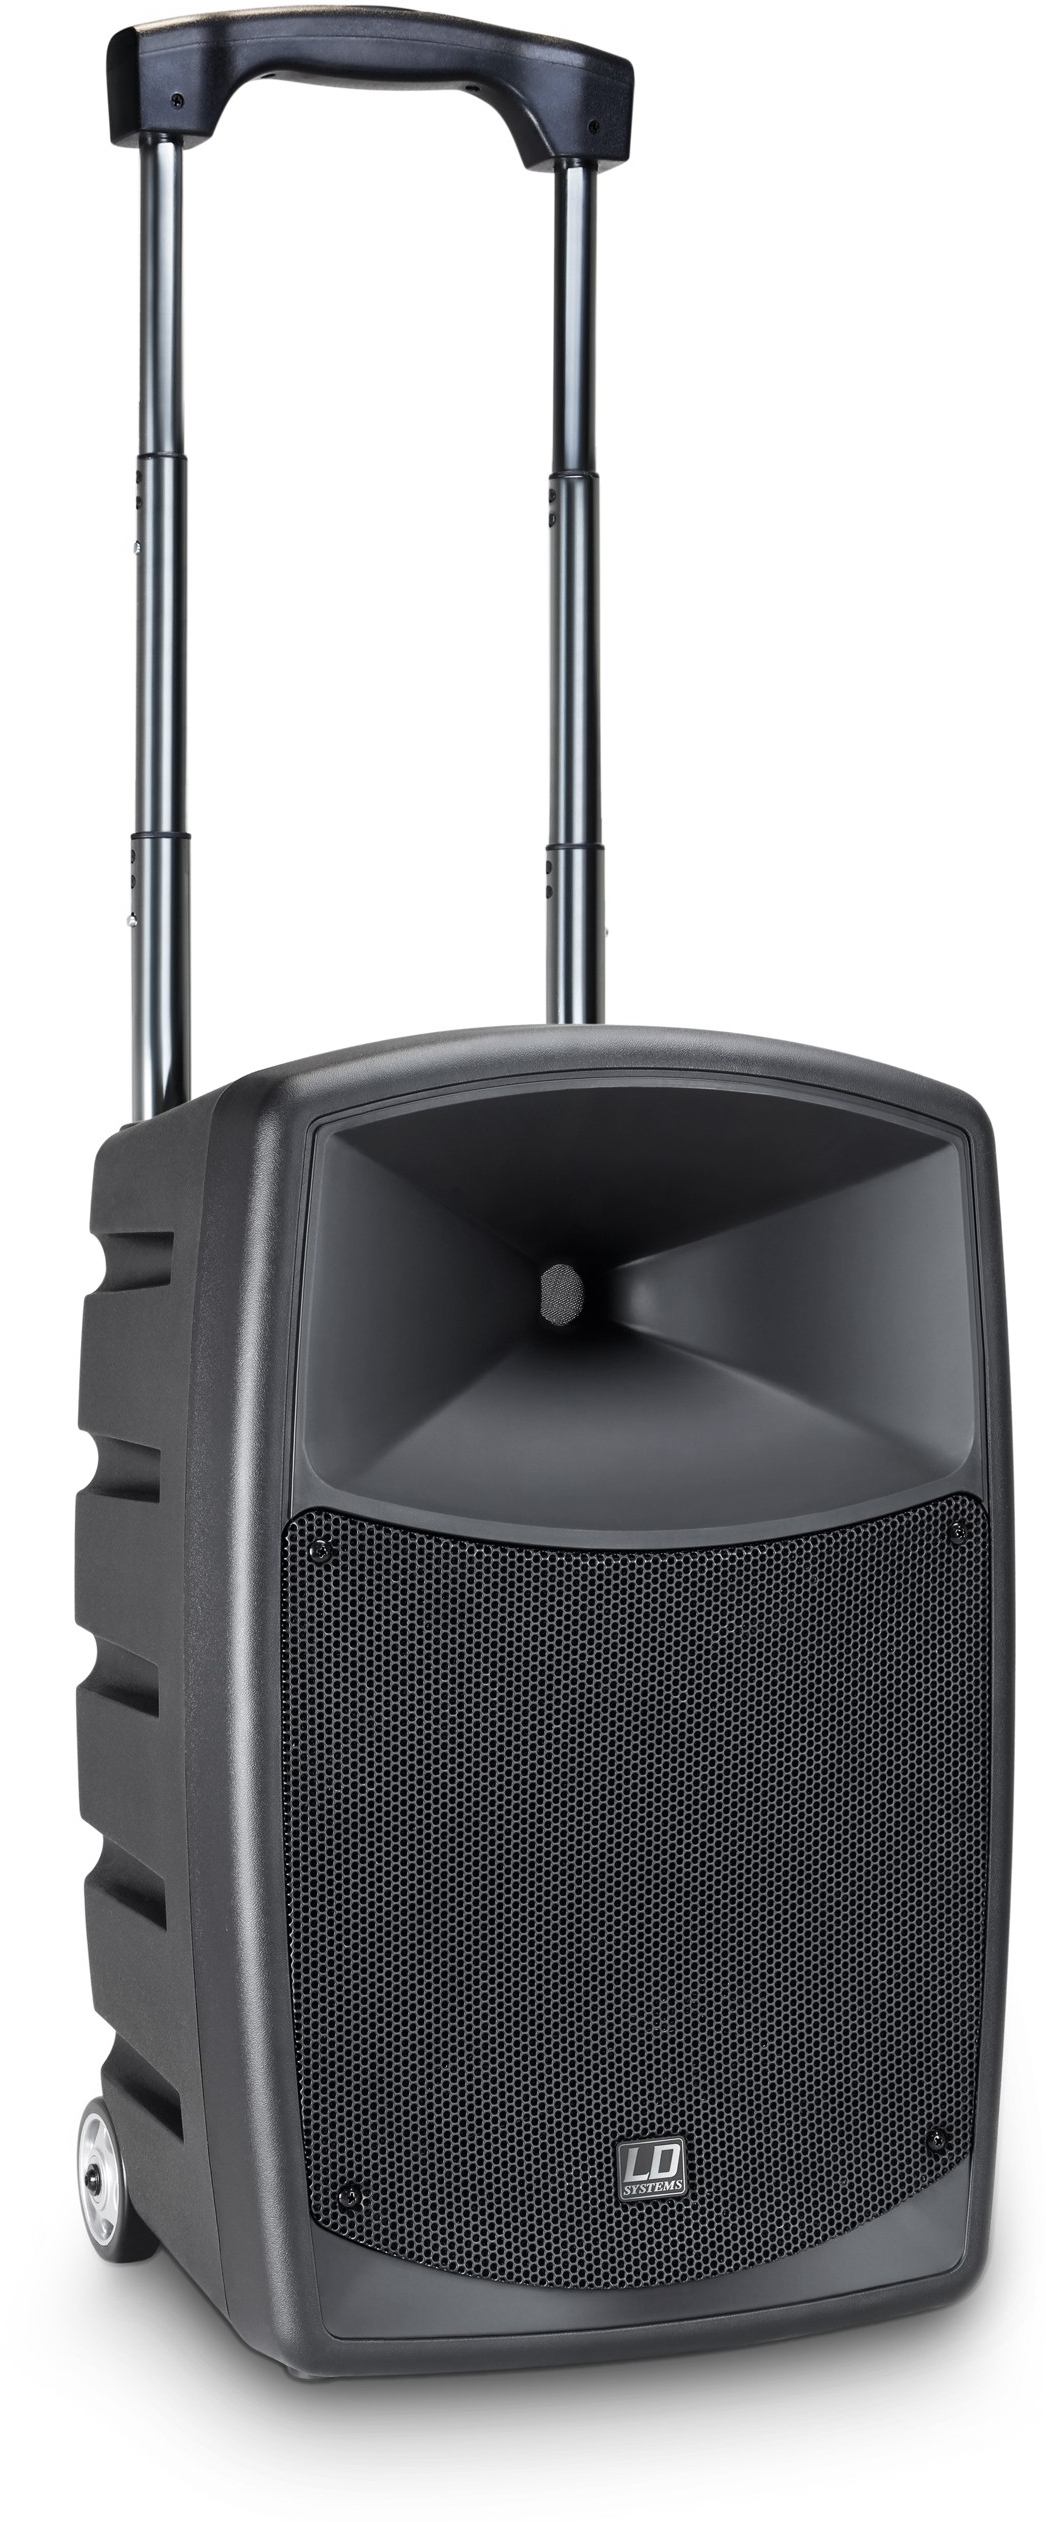 Ld Systems Roadbuddy 10 Basic - Portable PA system - Main picture